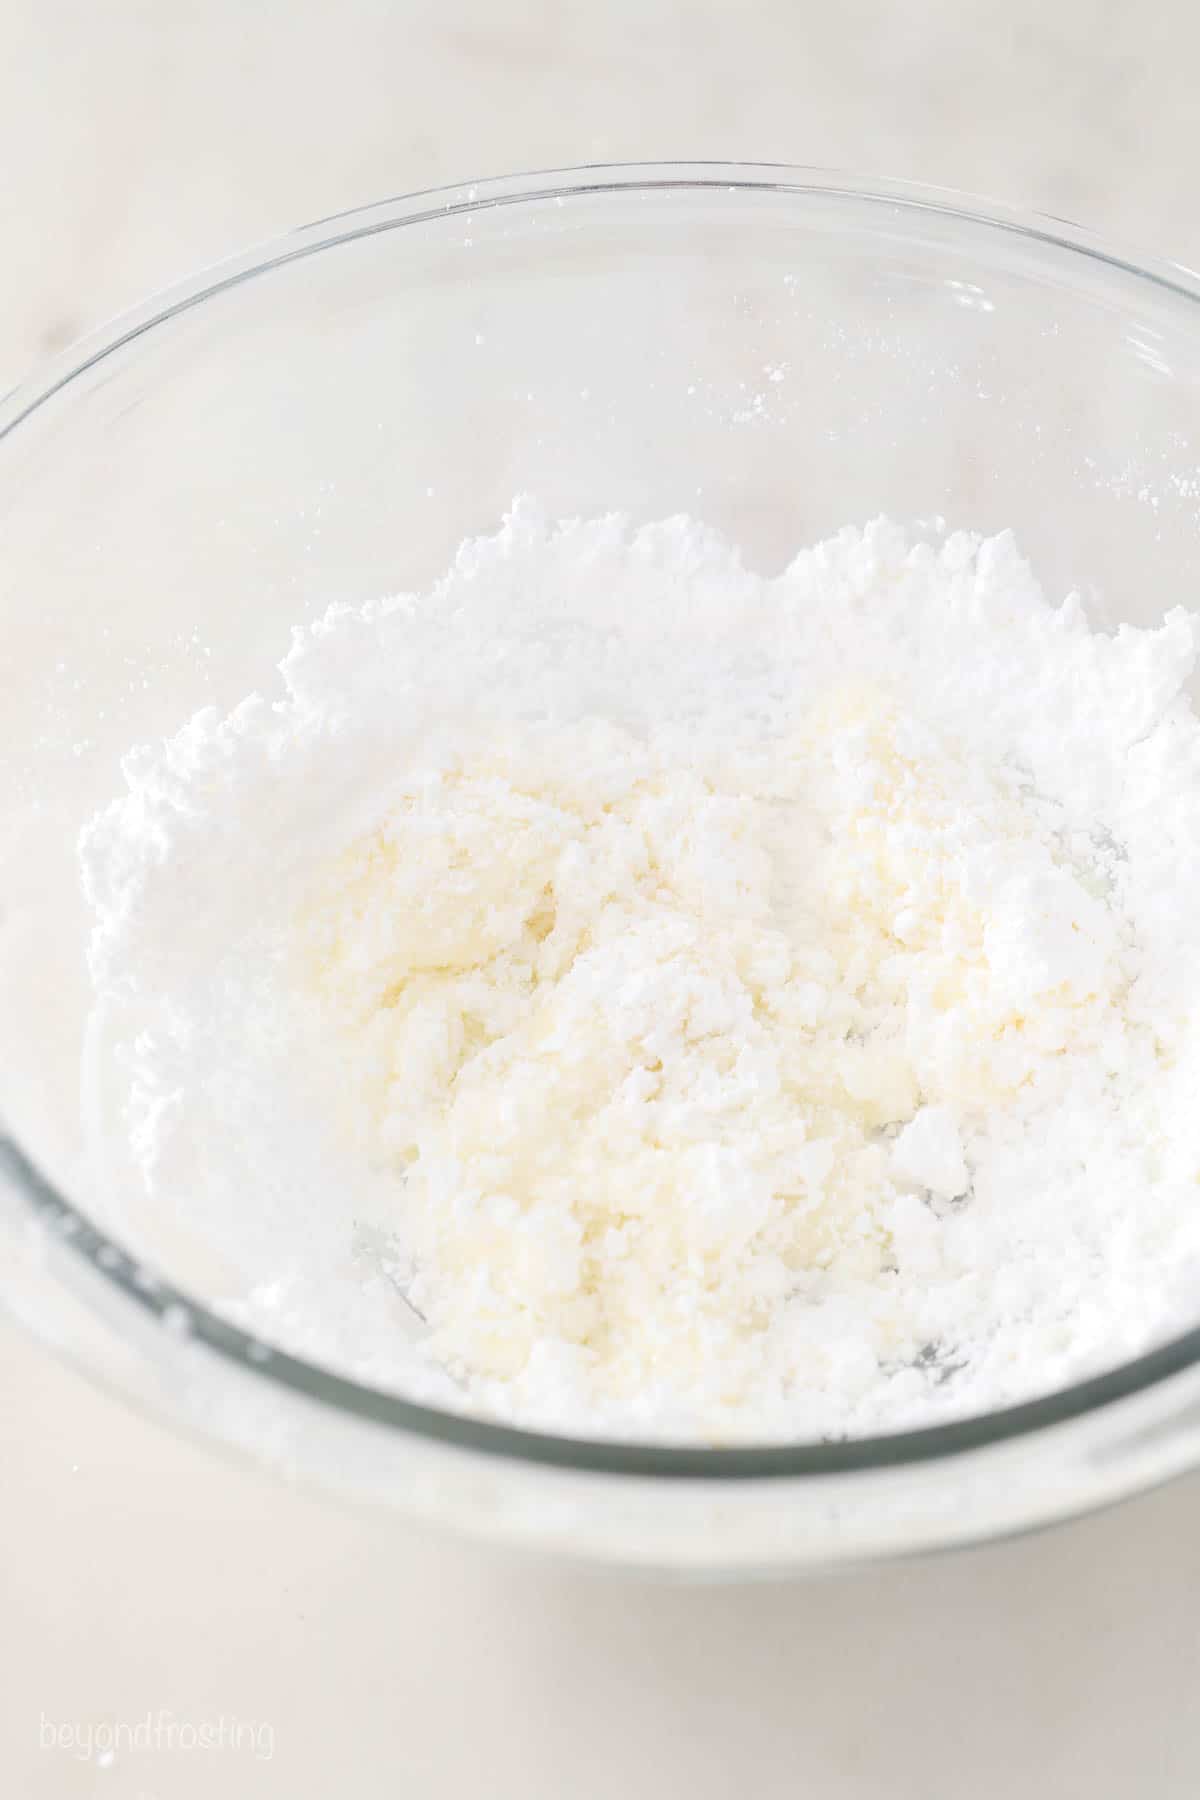 Powdered sugar being combined with milk in a large glass mixing bowl